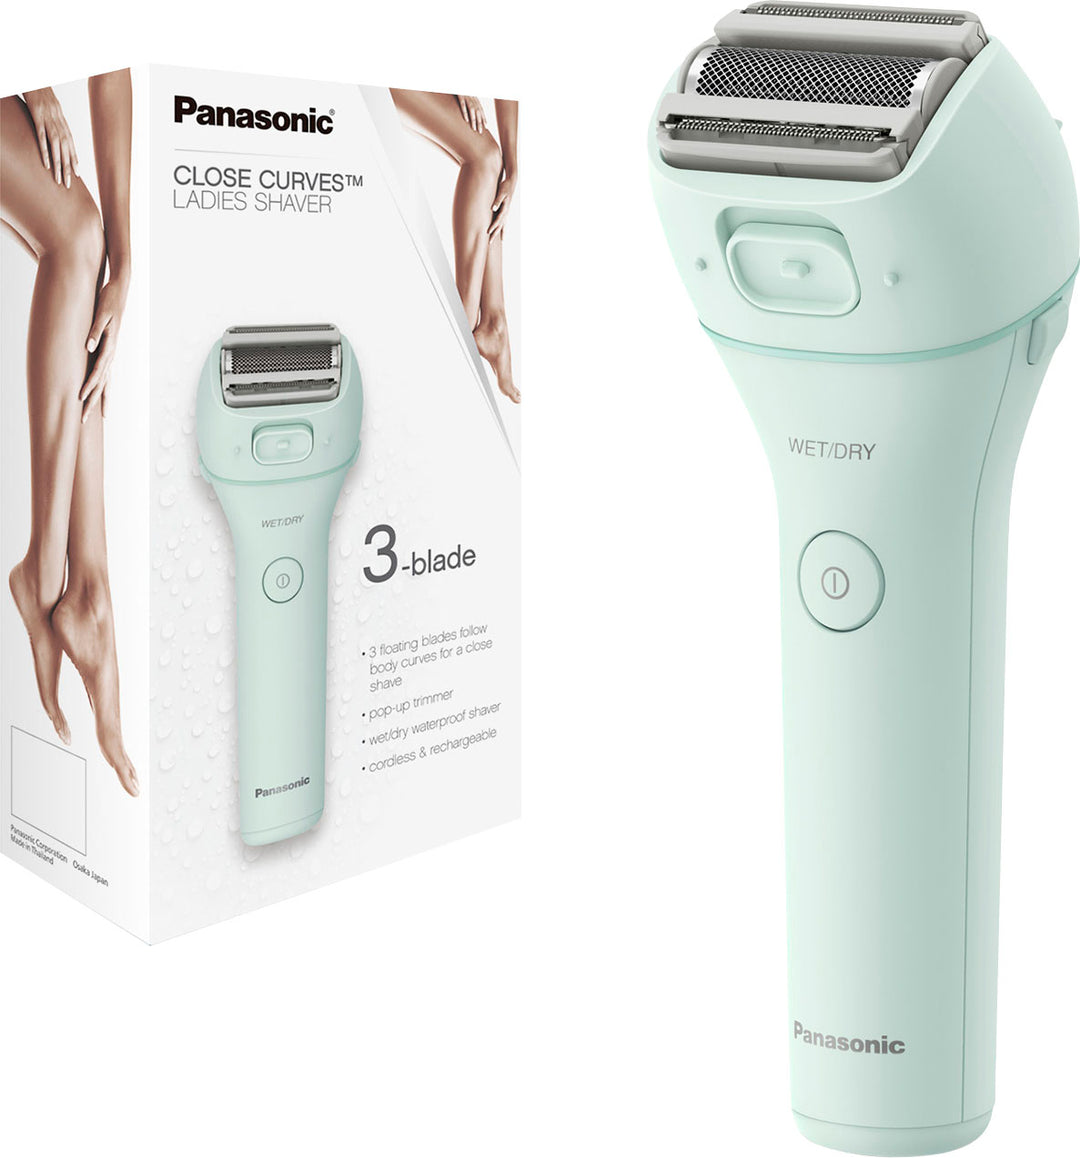 Panasonic - CloseCurves ES-WL60-G Rechargeable Wet/Dry Electric Shaver and Trimmer for Women - Mint_2